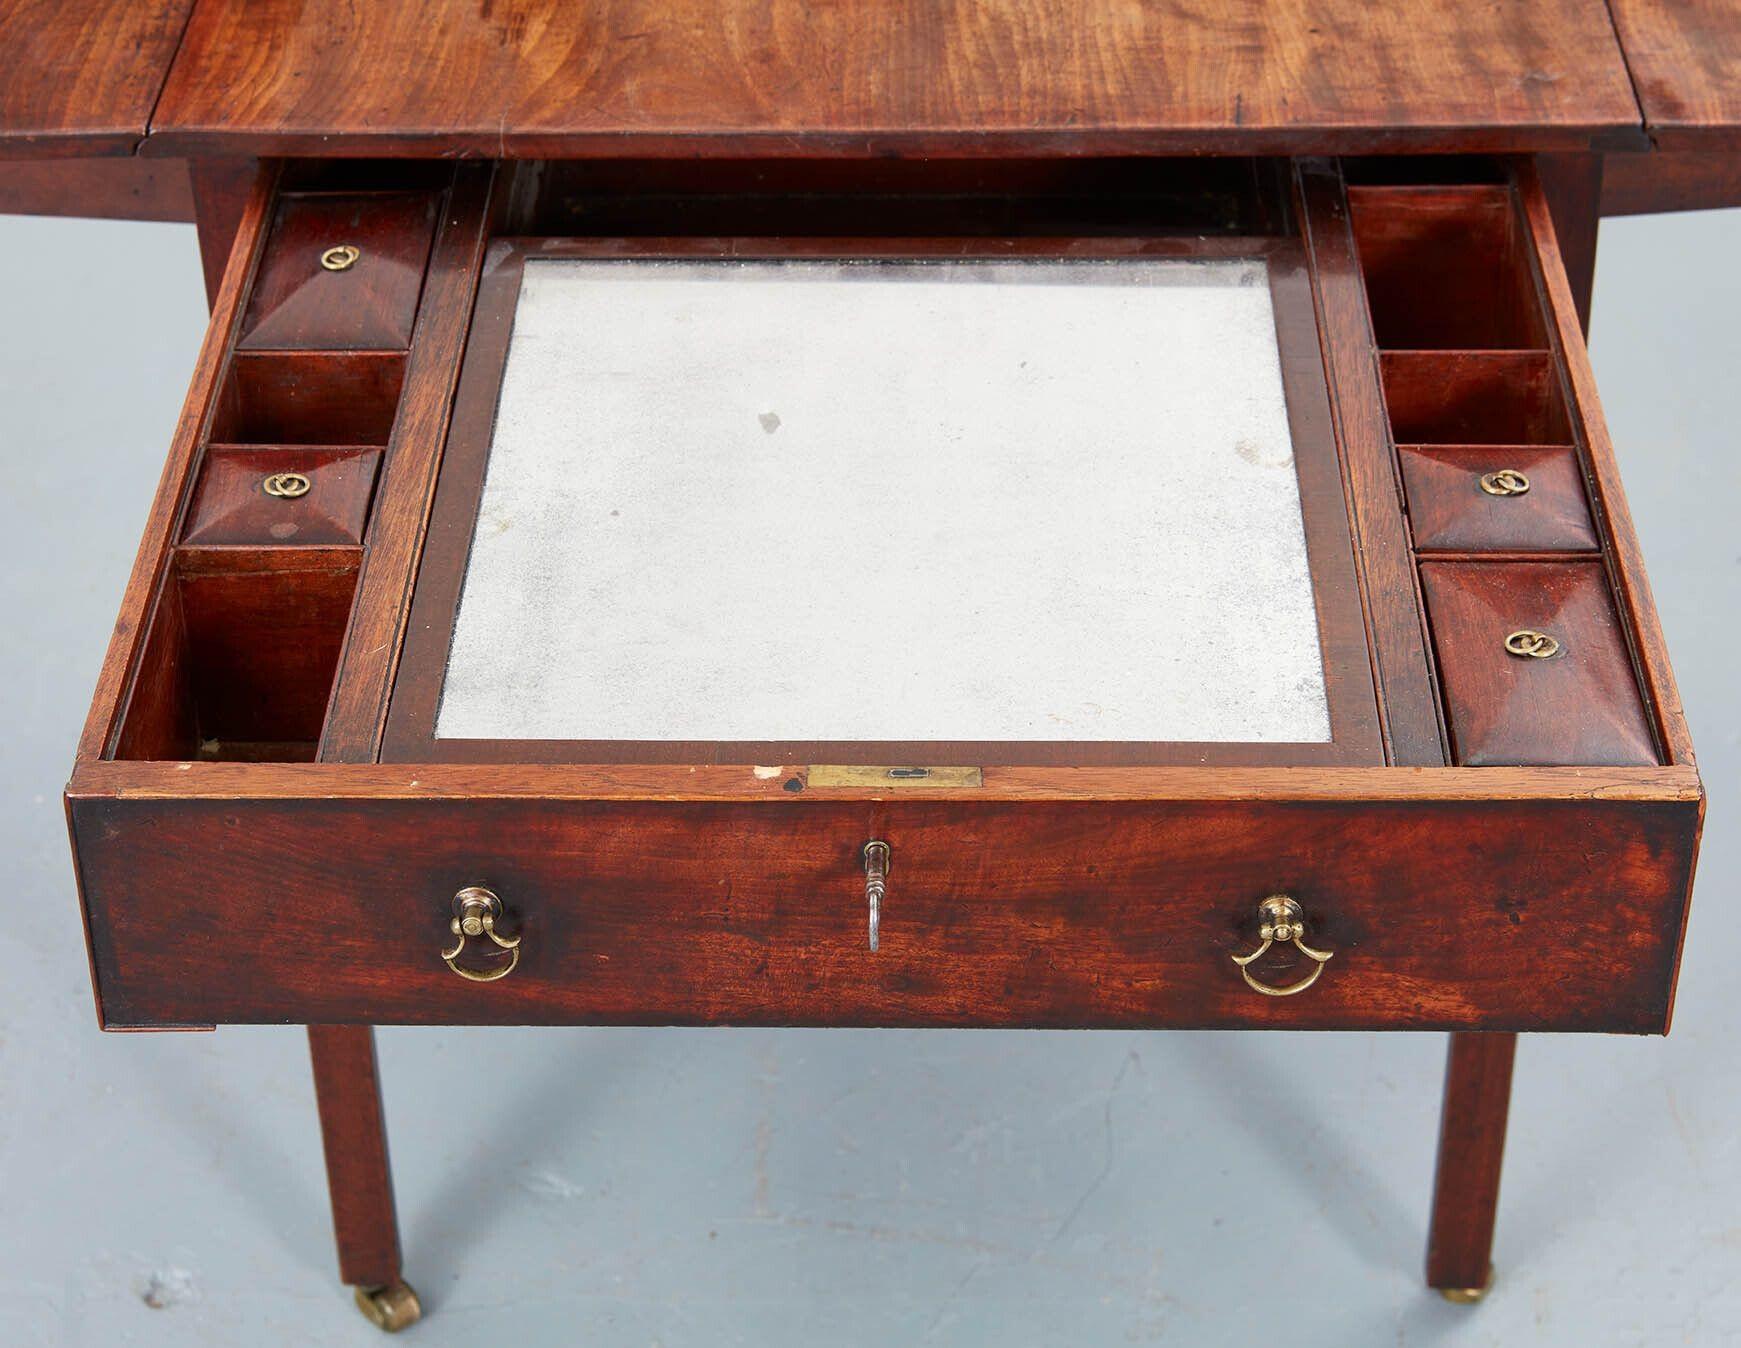 Pembroke/Dressing Table Attributed to Thomas Chippendale 1